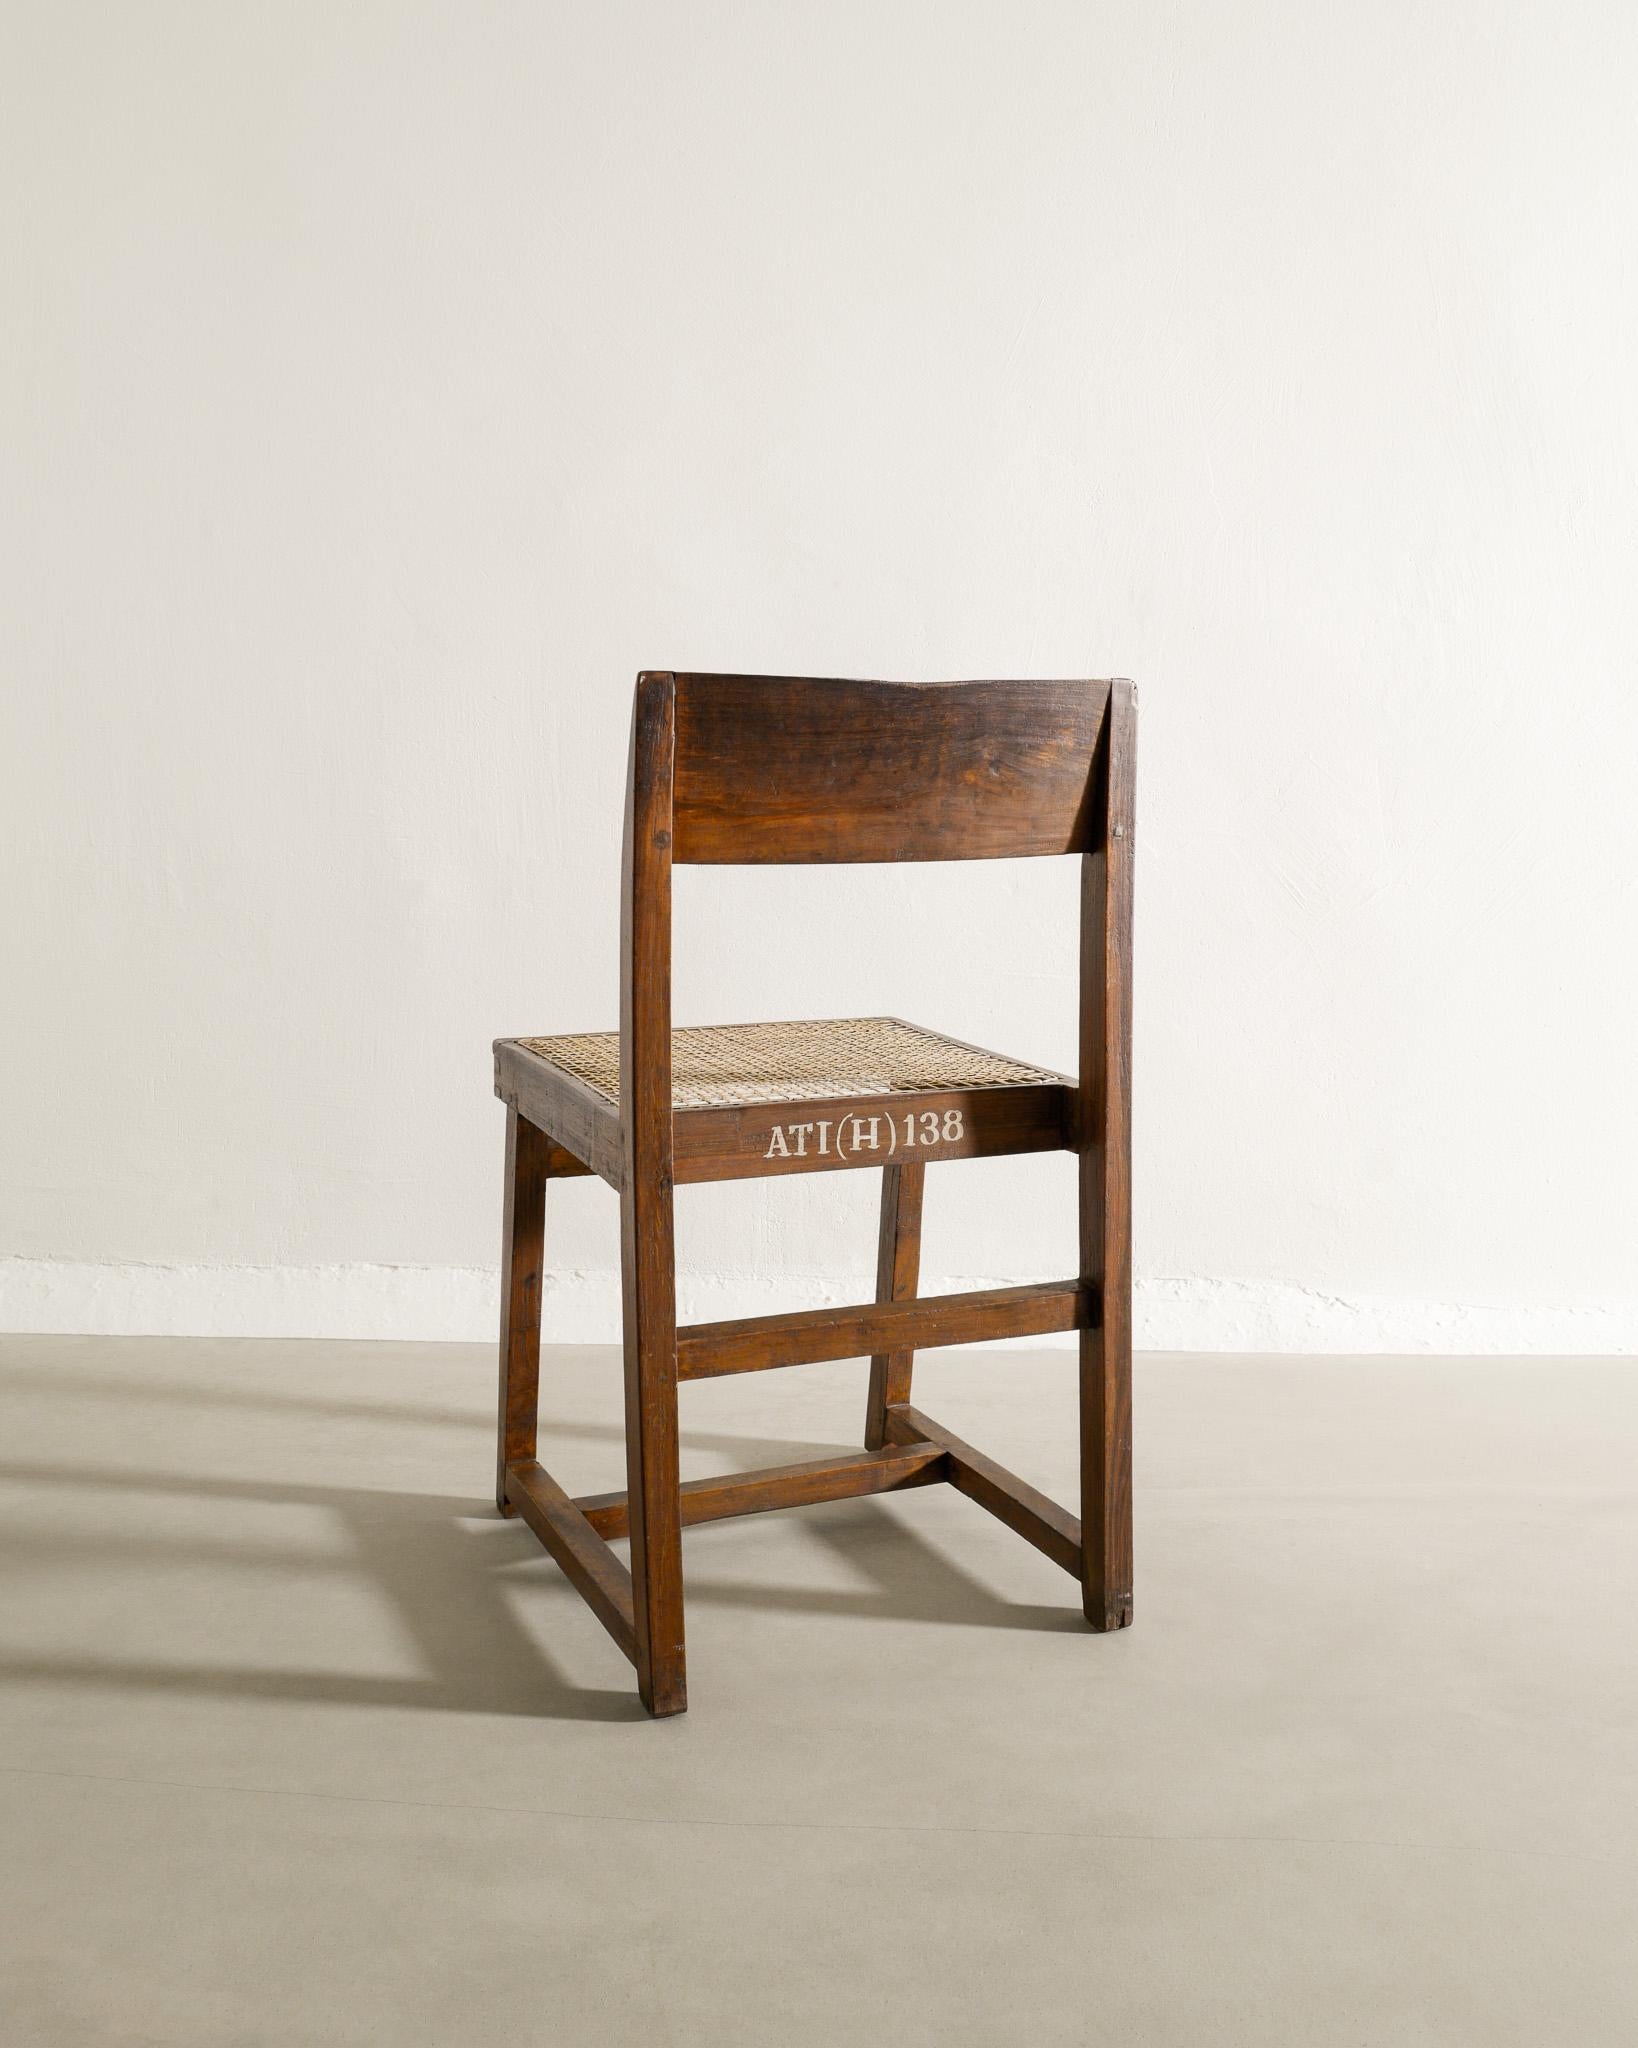 Rare mid century wooden dining office chair in teak and rattan by Pierre Jeanneret / Le Corbusier for Chandigarh India, 1950s. In good vintage and professionally restored condition. The cushion is included in the purchase. 

Dimensions: H: 78 cm /